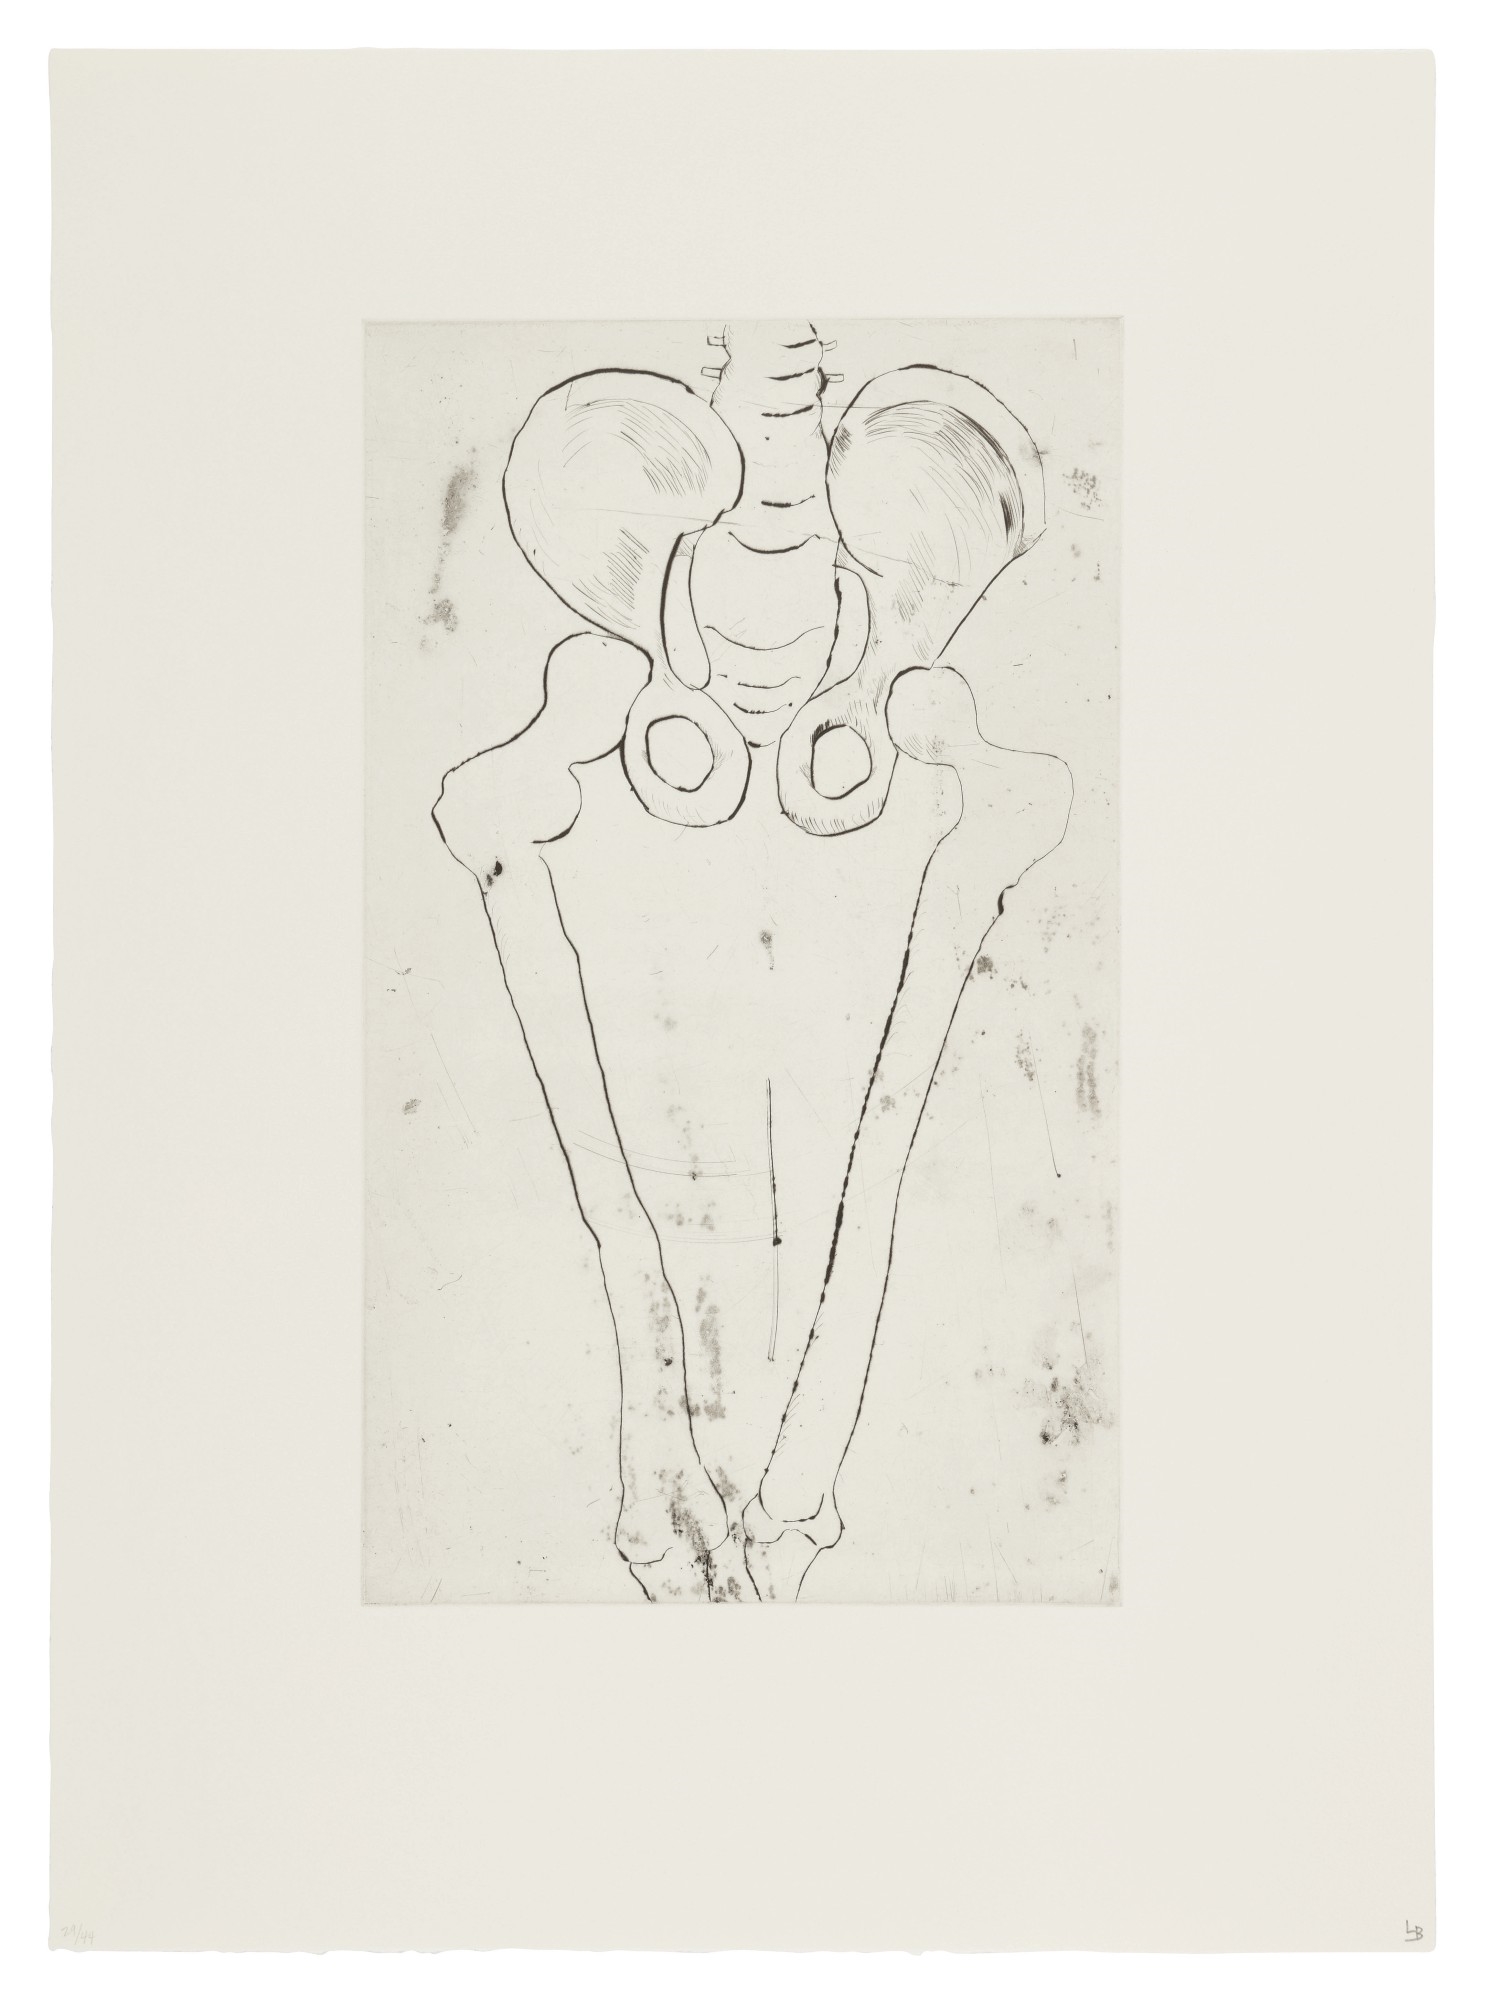 Self Portrait by Louise Bourgeois, 1990, Drypoint, etching, and